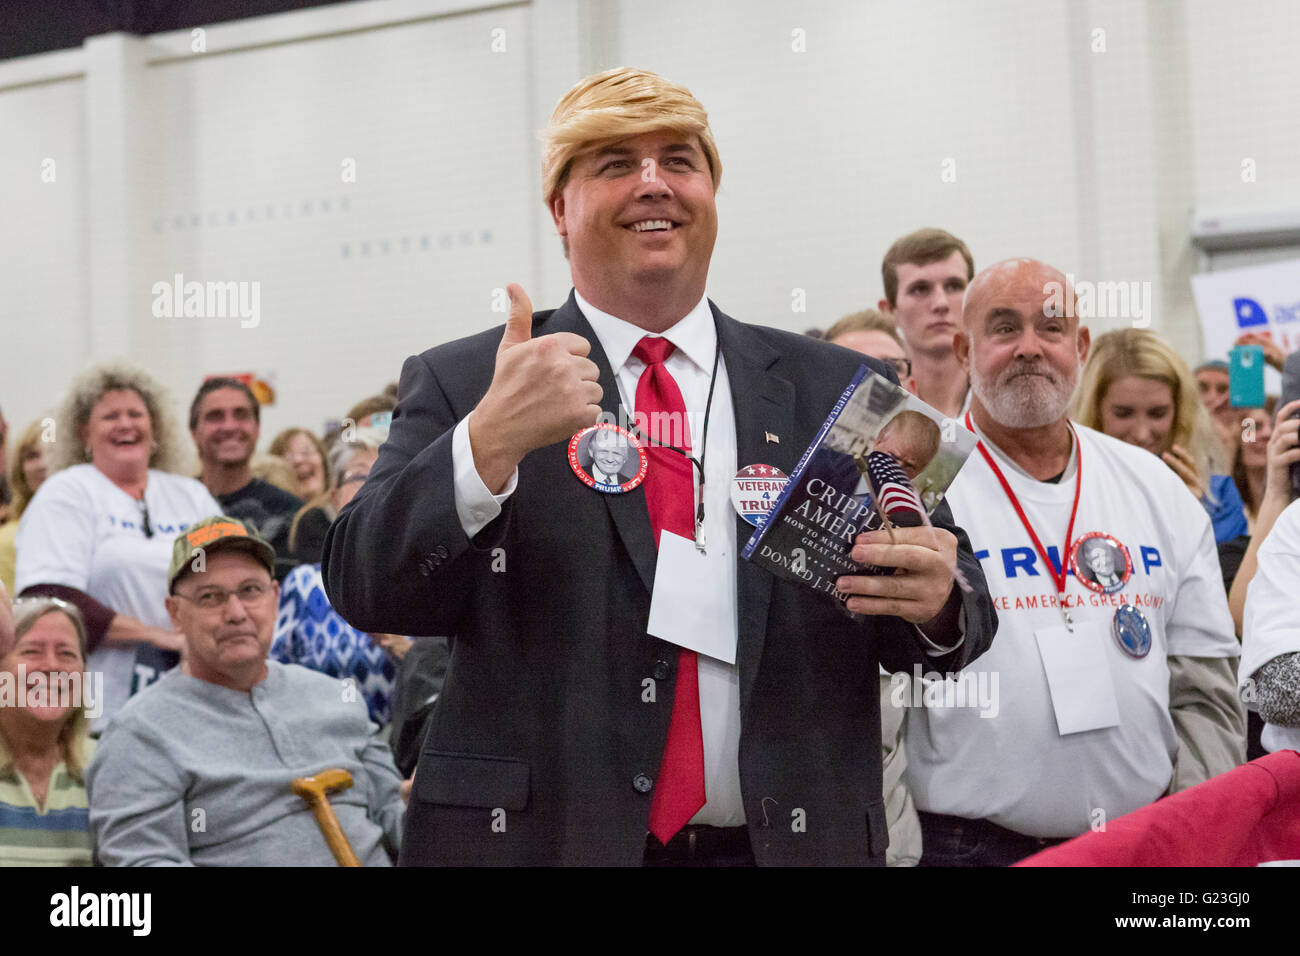 A Donald Trump look-a-like during a campaign rally for the Billionaire candidate at the Myrtle Beach Convention Center November 24, 2015 in Myrtle Beach, South Carolina. Stock Photo